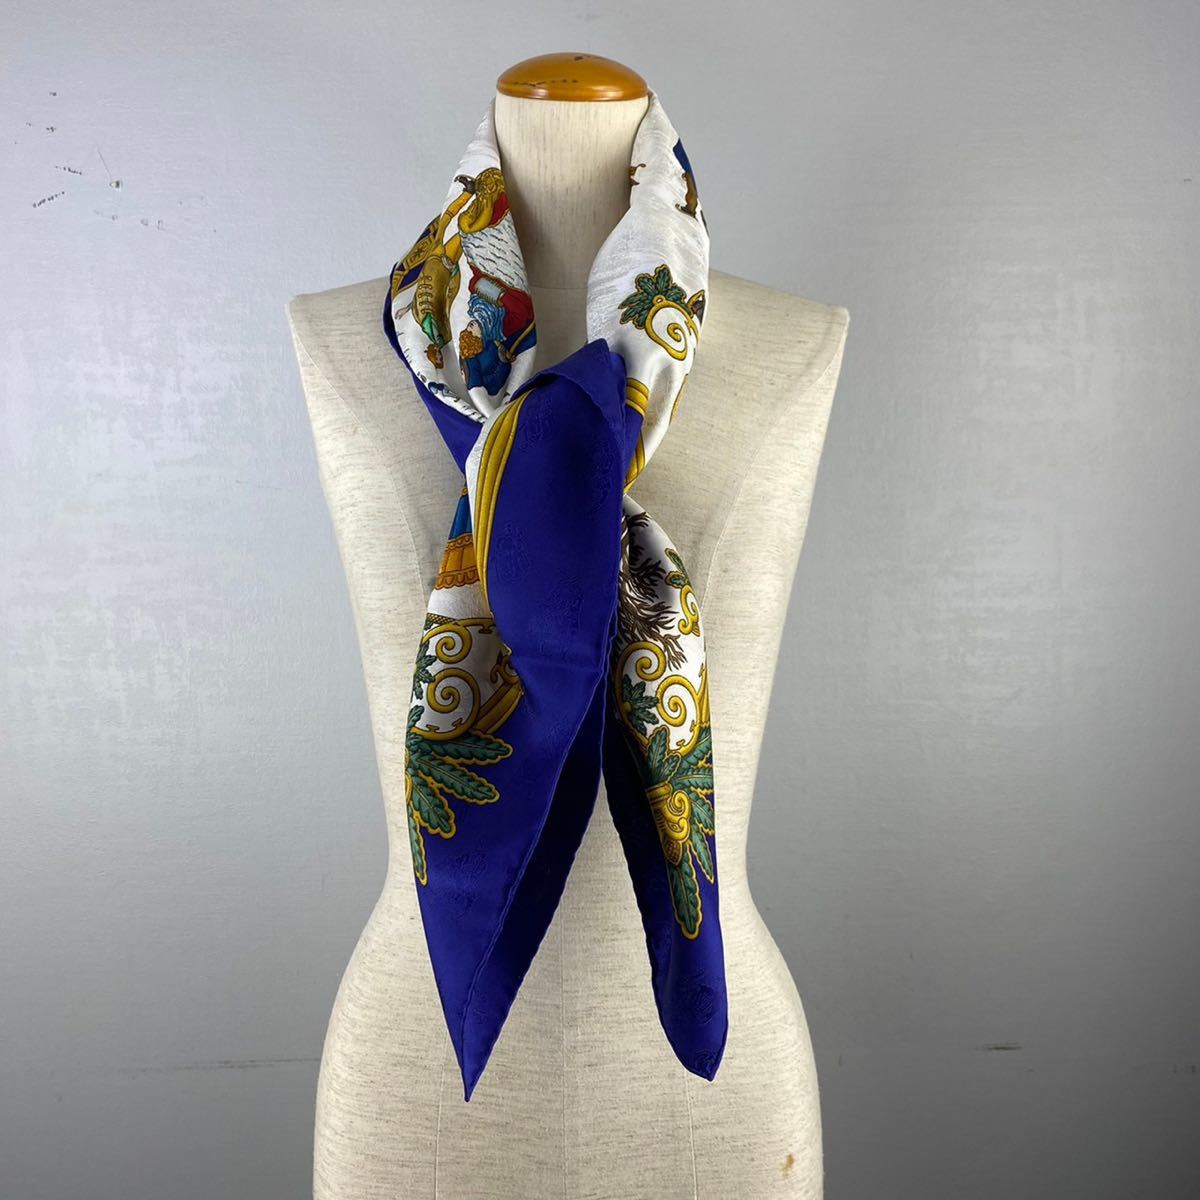 HERMES Joies d' Hiver LARGE SIZE SILK 100% SCARF MADE IN FRANCE/エルメス 冬の愉しみ  シルク100%大判スカーフ